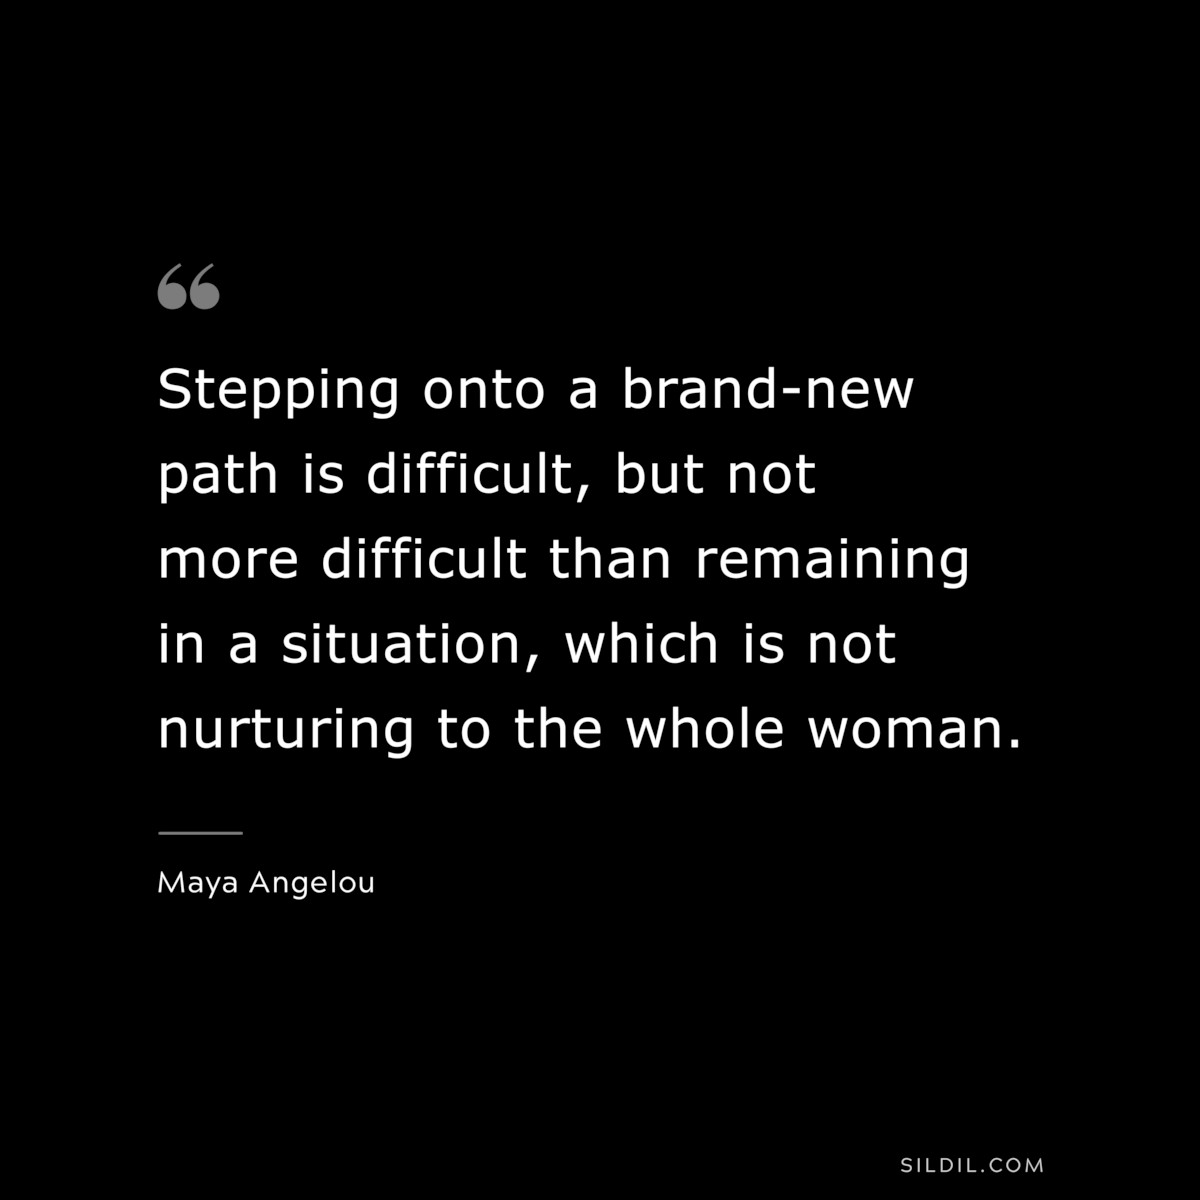 Stepping onto a brand-new path is difficult, but not more difficult than remaining in a situation, which is not nurturing to the whole woman. ― Maya Angelou